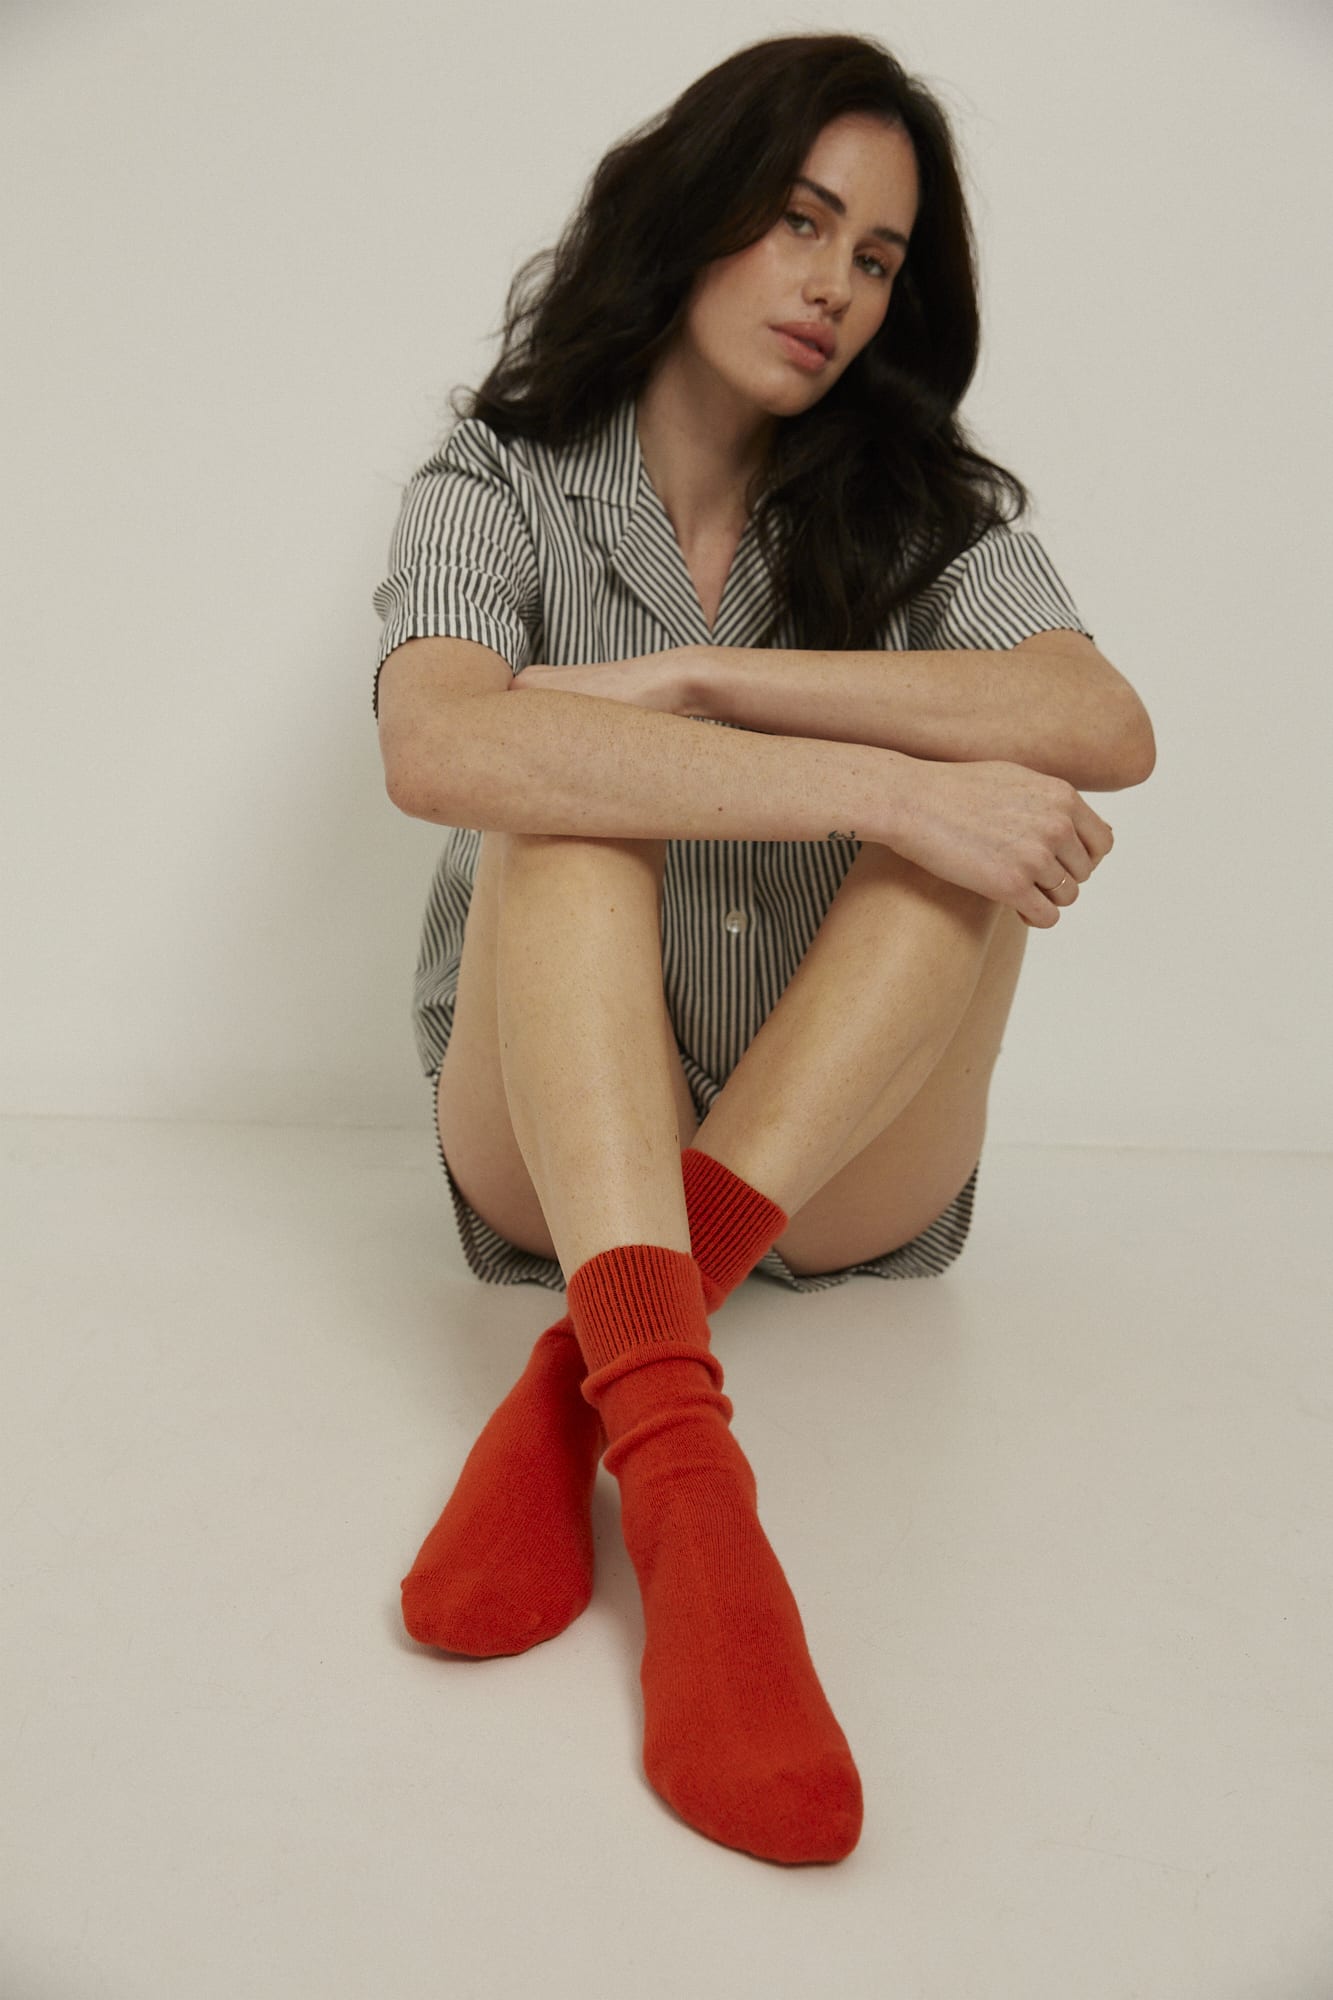 Woman wearing Perino bed socks in colour Orange, and Black and White Striped sleepwear.  Both items from General Sleep.  